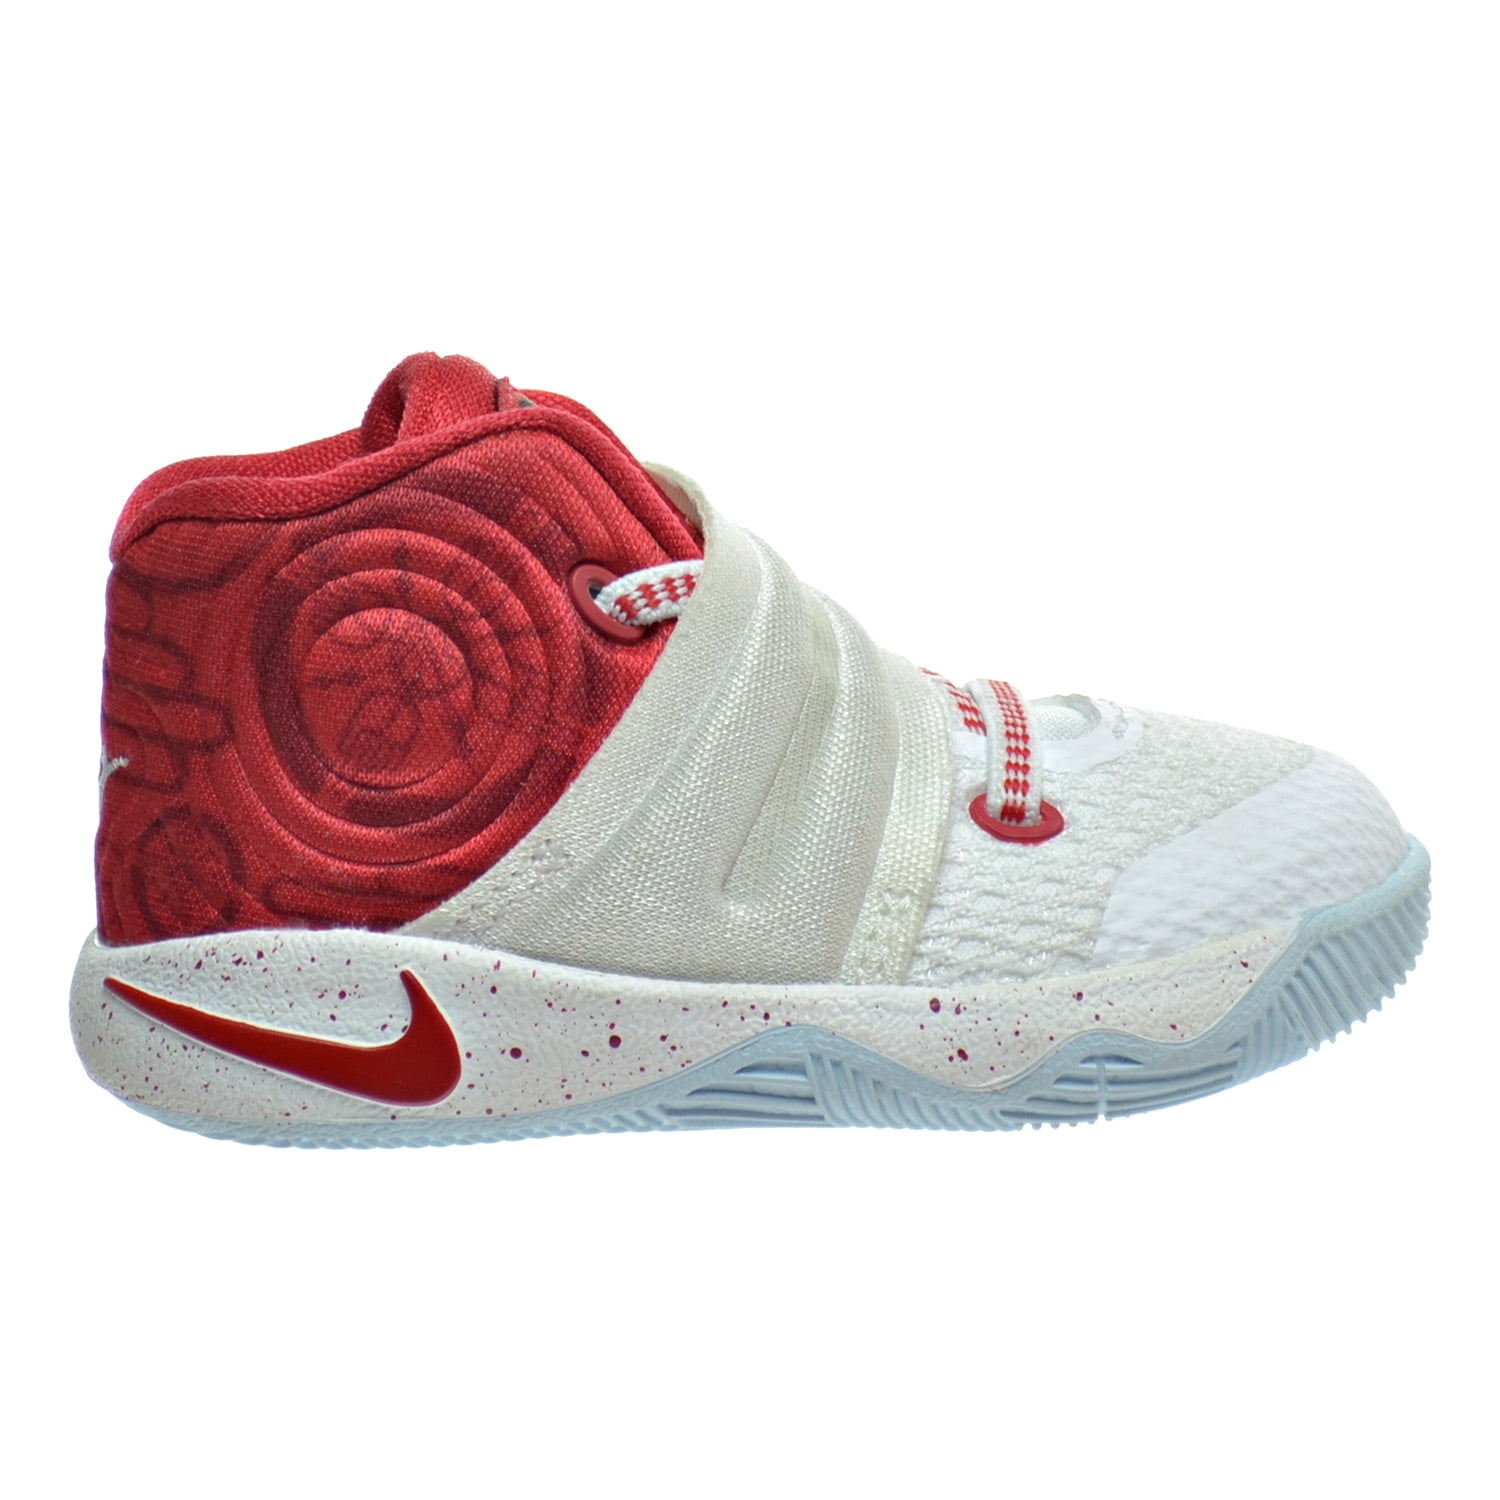 kyrie shoes white and red